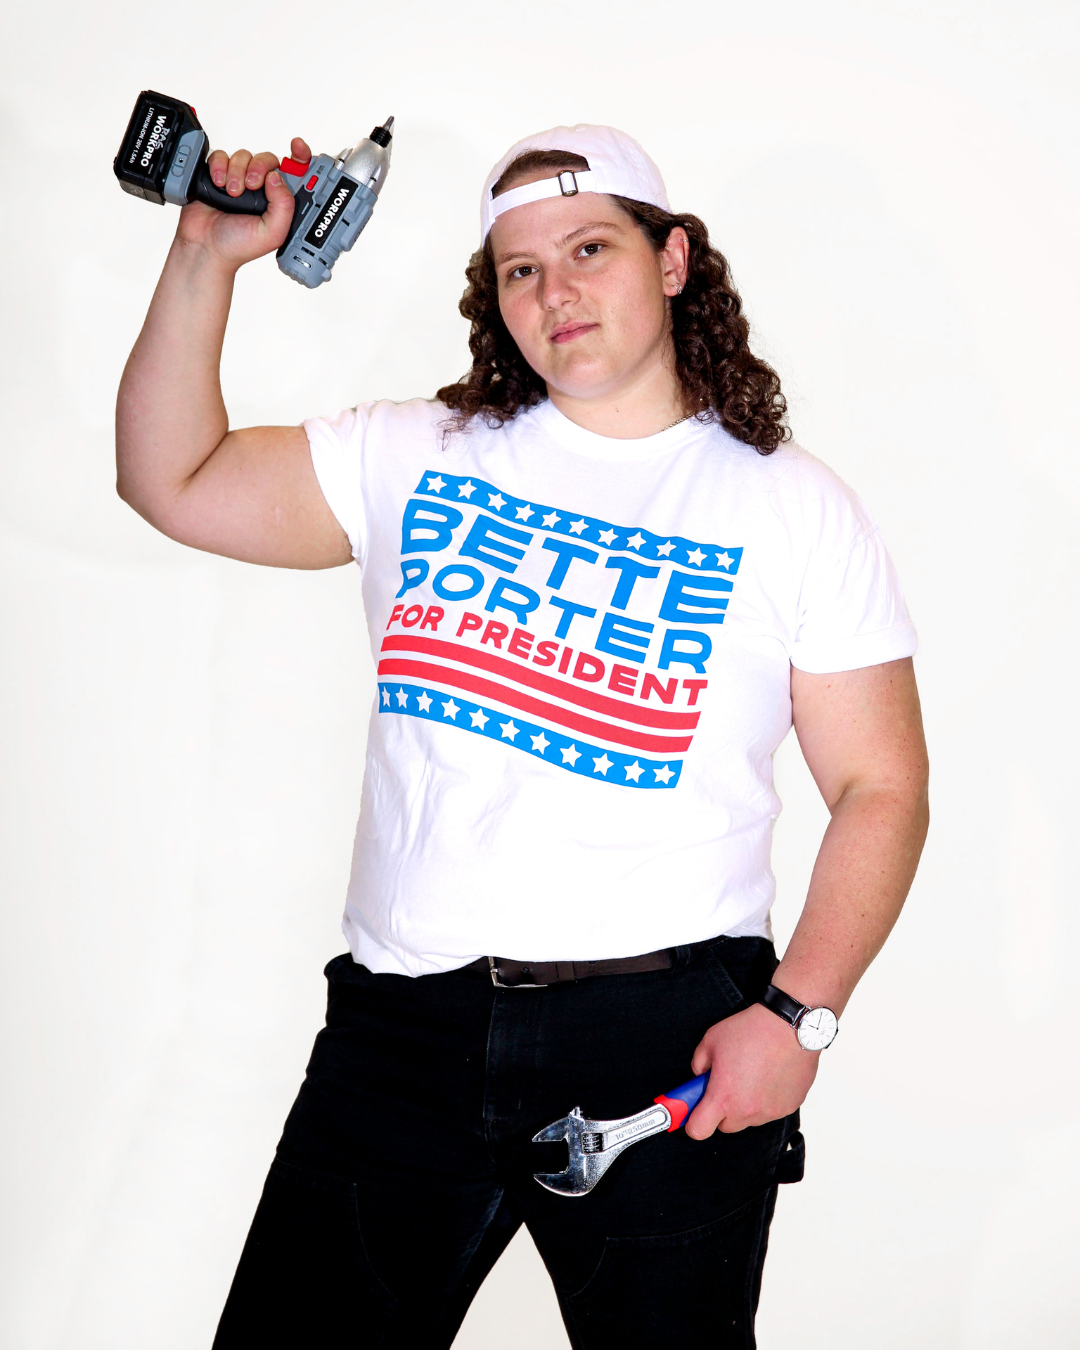 Model Jenny is wearing the Bette For President Tee in size XL. They are 5'9" and their bra size is 38DDD. They are also holding a power drill on one hand and a wrench in the other. The tee is white and has a blue and red graphic that resembles a political campaign sign. In the middle are the words "Bette Porter For President," referring to the character Bette Porter from the tv show "The L Word" on Showtime.